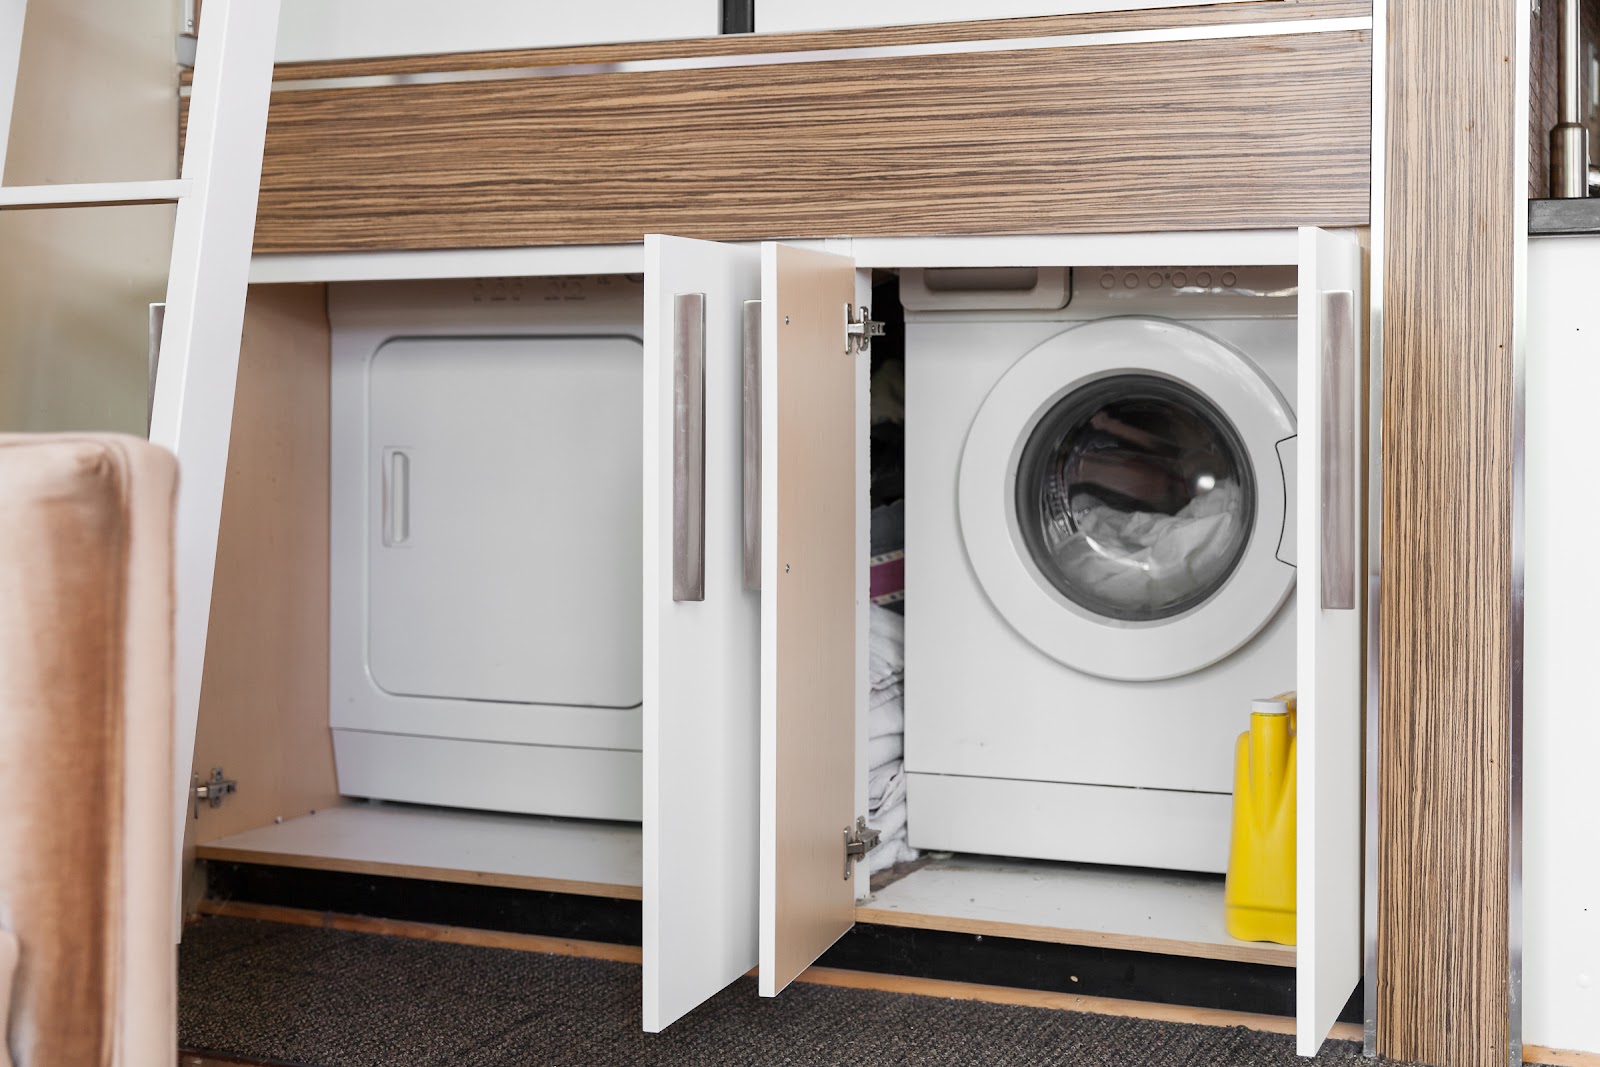 Store laundry machines below the loft bed